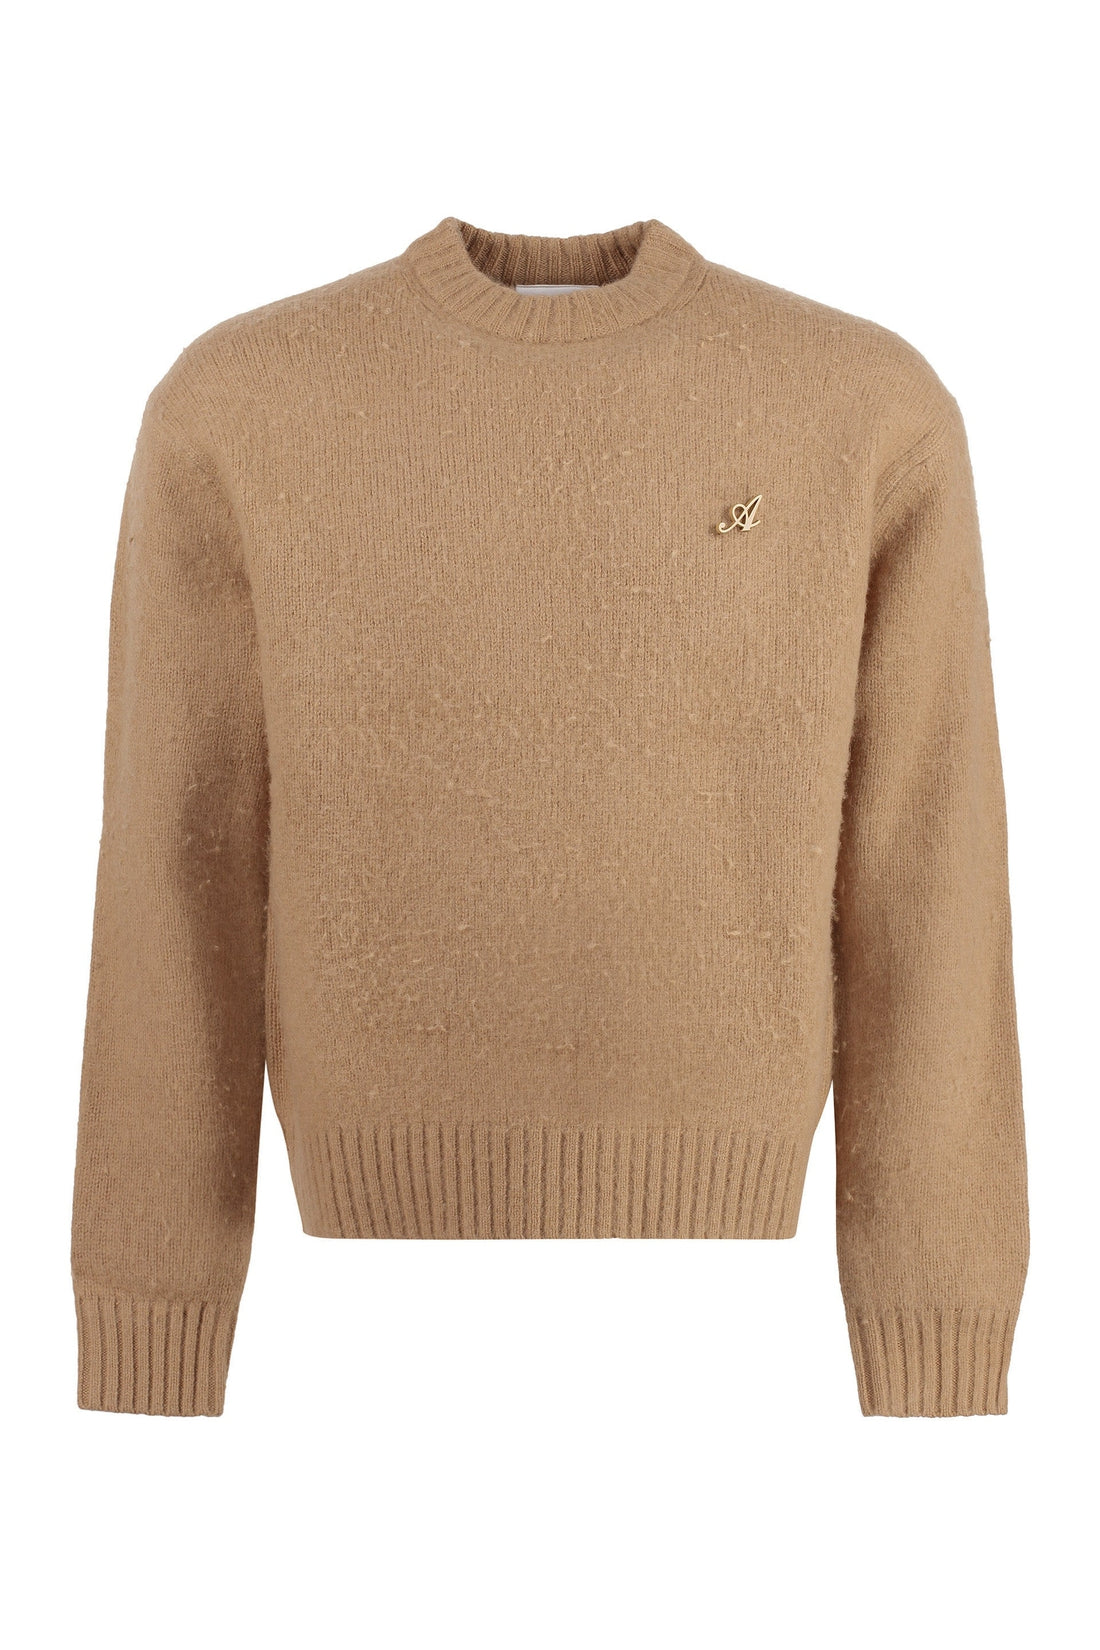 Axel Arigato-OUTLET-SALE-Wool and cashmere blend sweater-ARCHIVIST